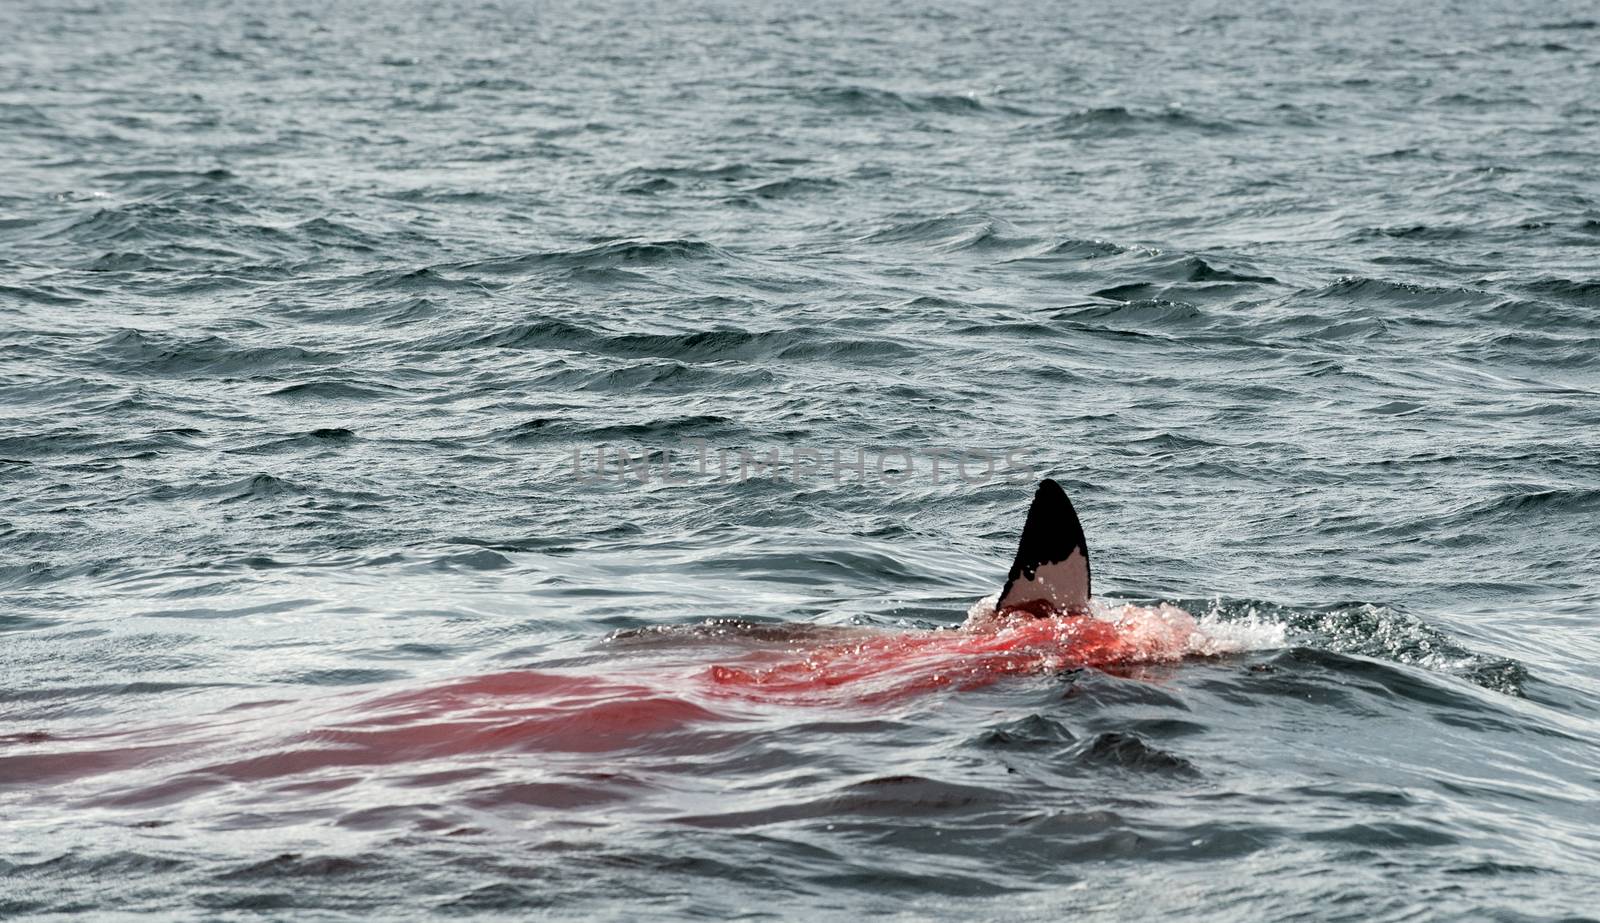 Fin of a Great white shark (Carcharodon carcharias)in the blood. by SURZ